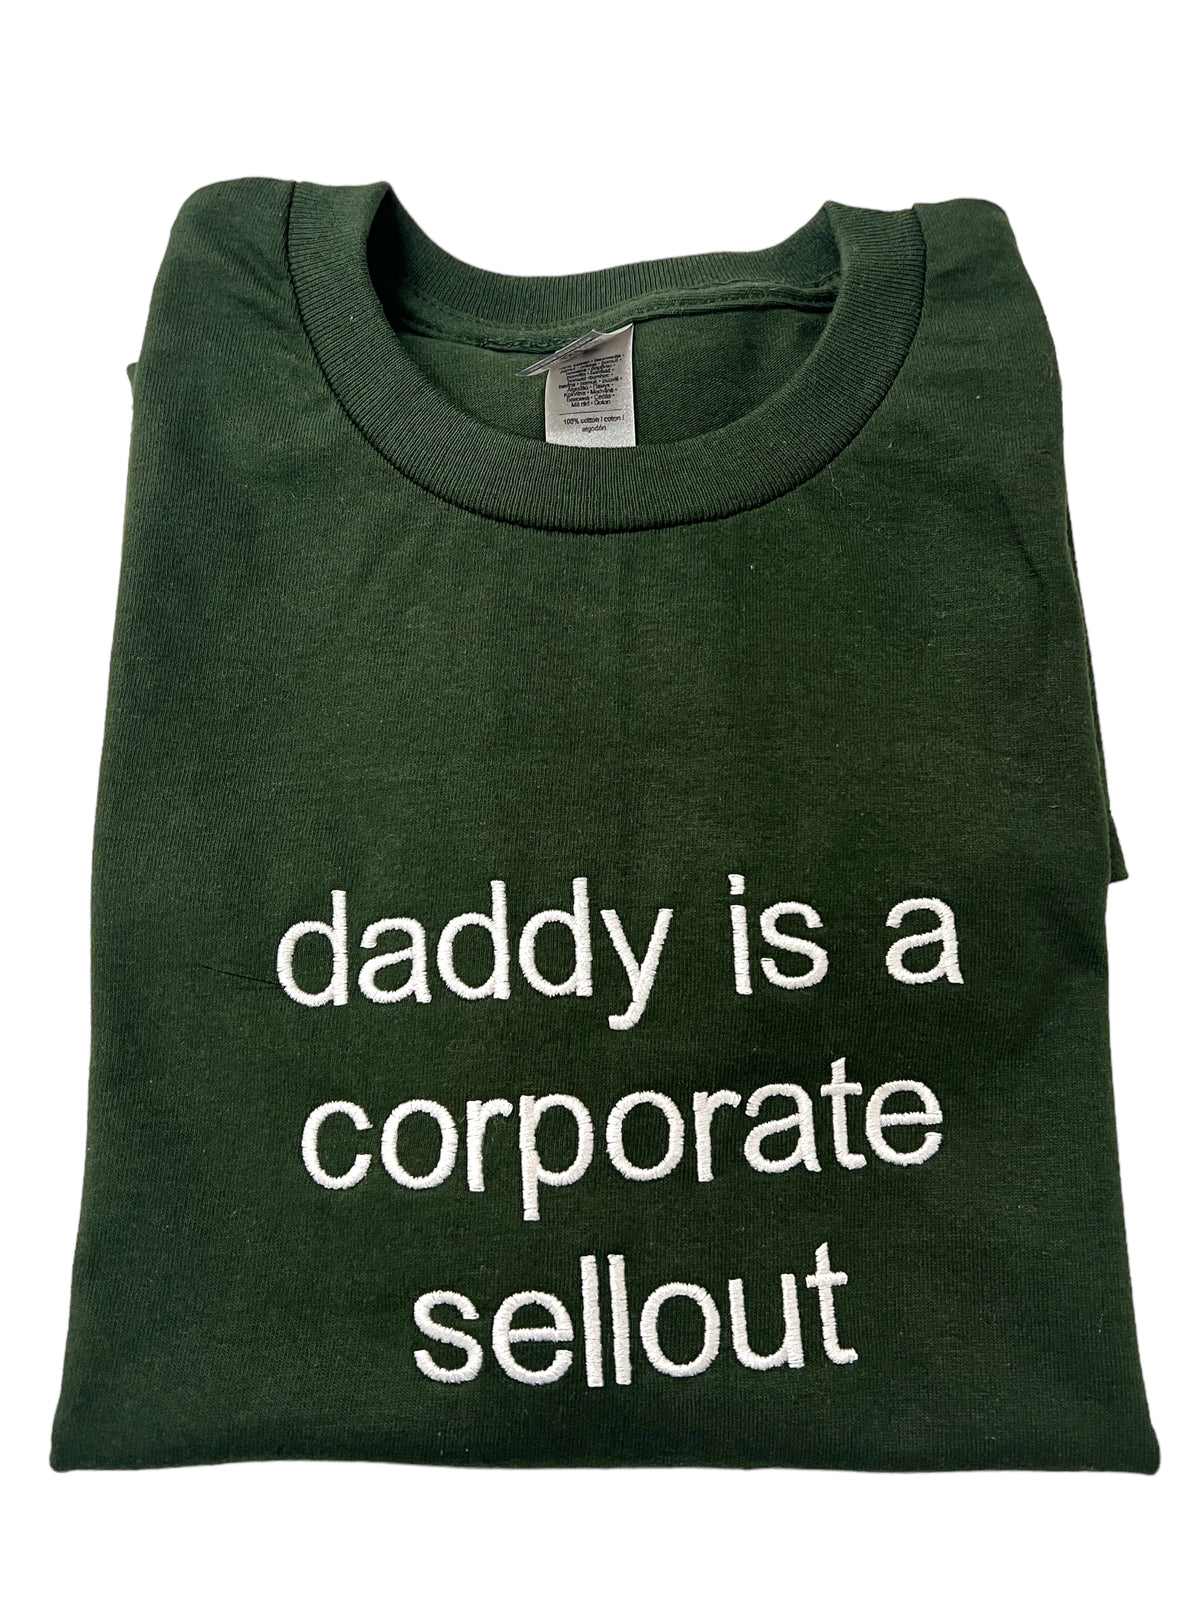 Daddy Is A Corporate Sellout Embroidered Unisex T-Shirt or Sweatshirt